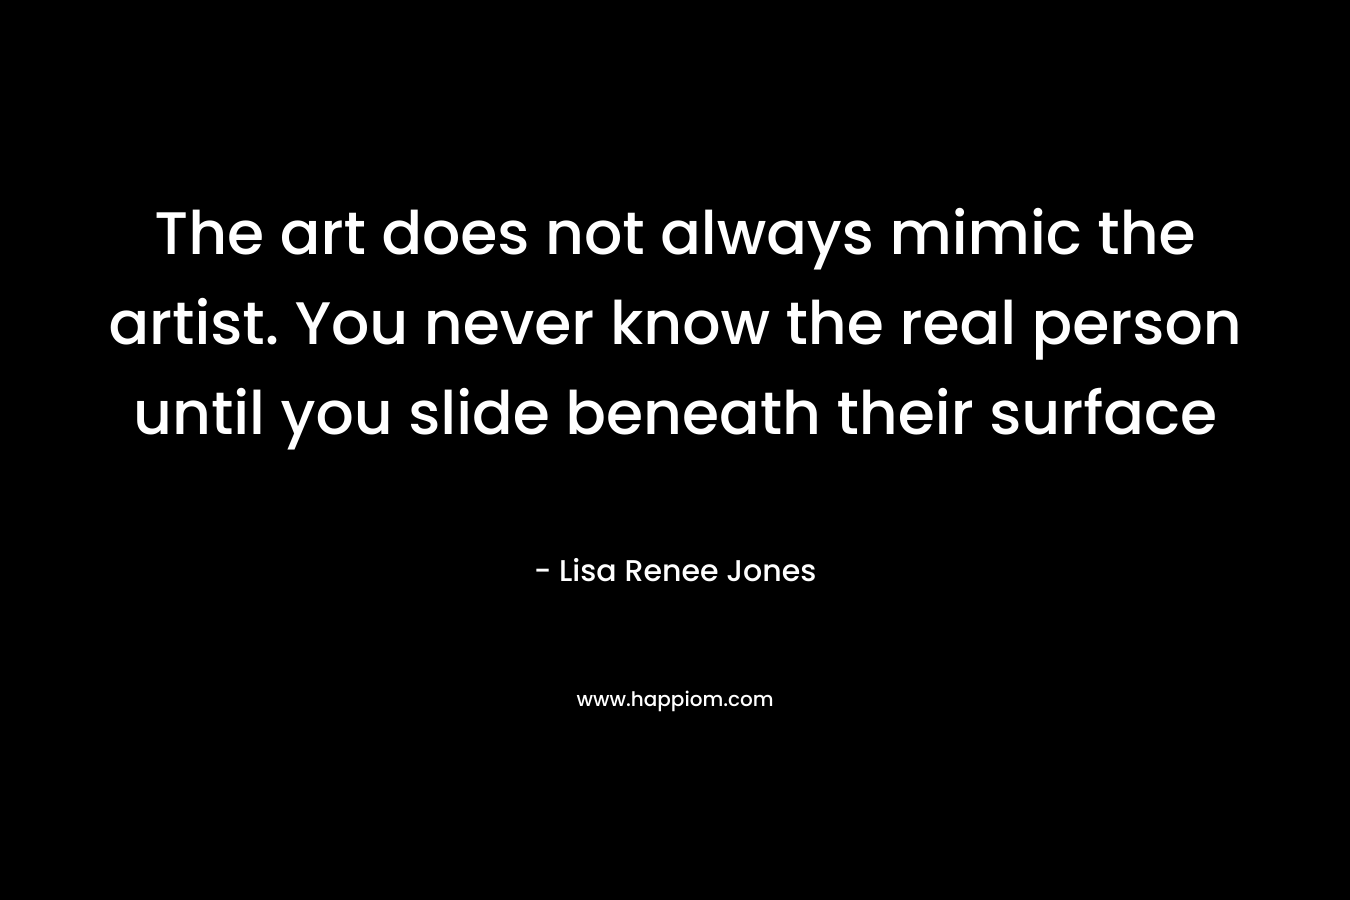 The art does not always mimic the artist. You never know the real person until you slide beneath their surface – Lisa Renee Jones